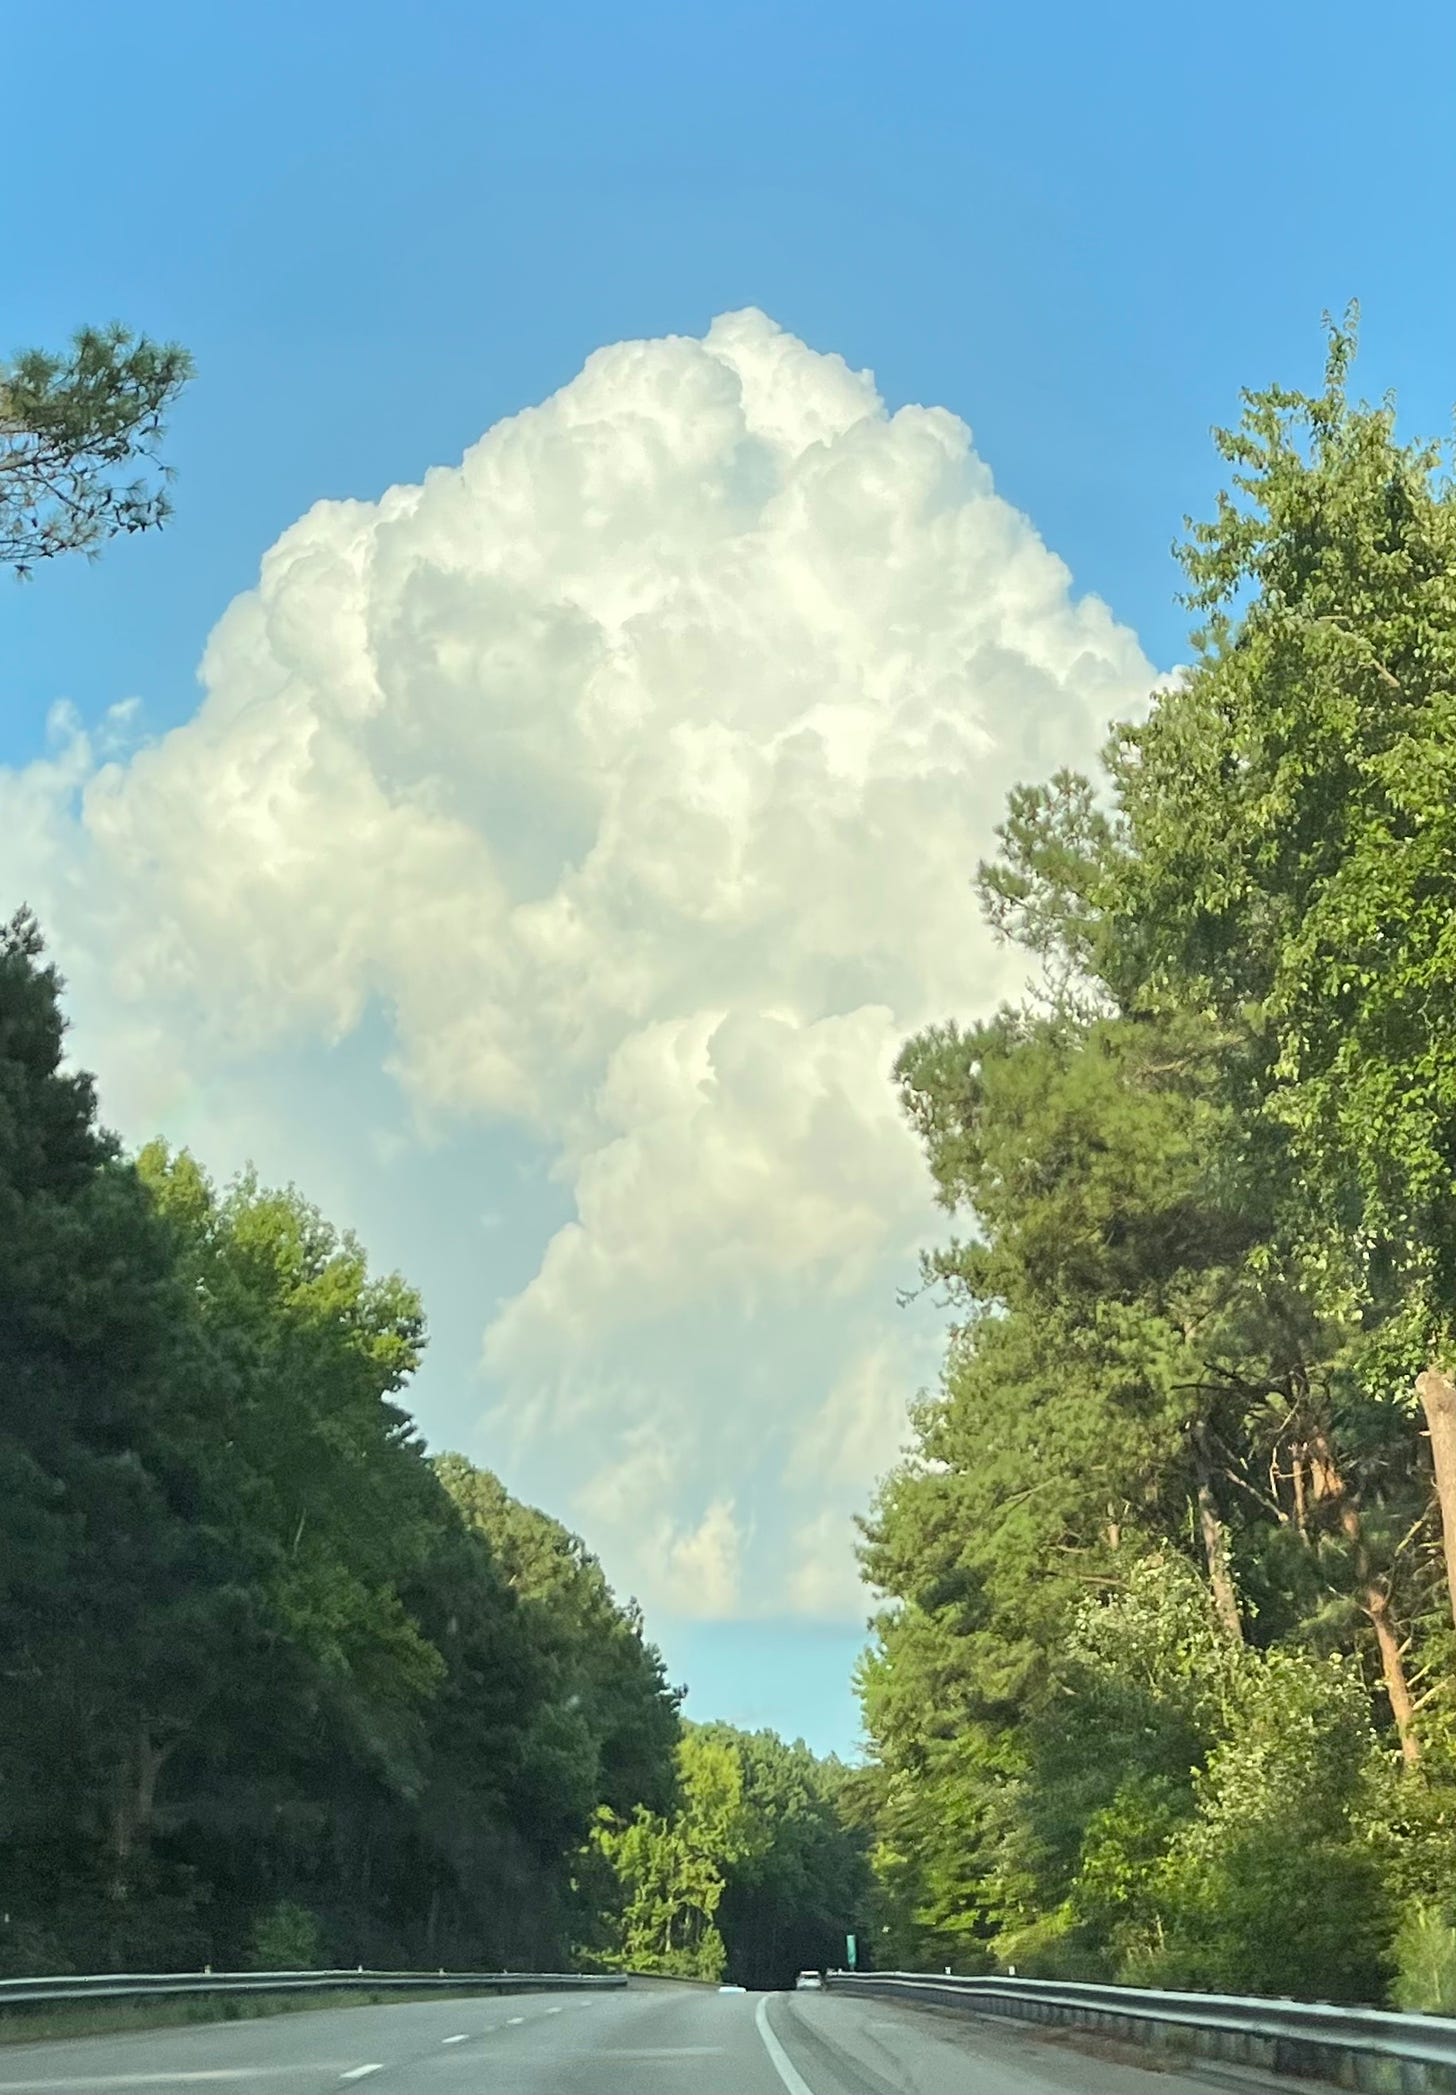 a gigantic cloud like a puffy mountain rises up over the highway, held by tall green trees against a blue sky. a tunnel opens into blackness beneath it.